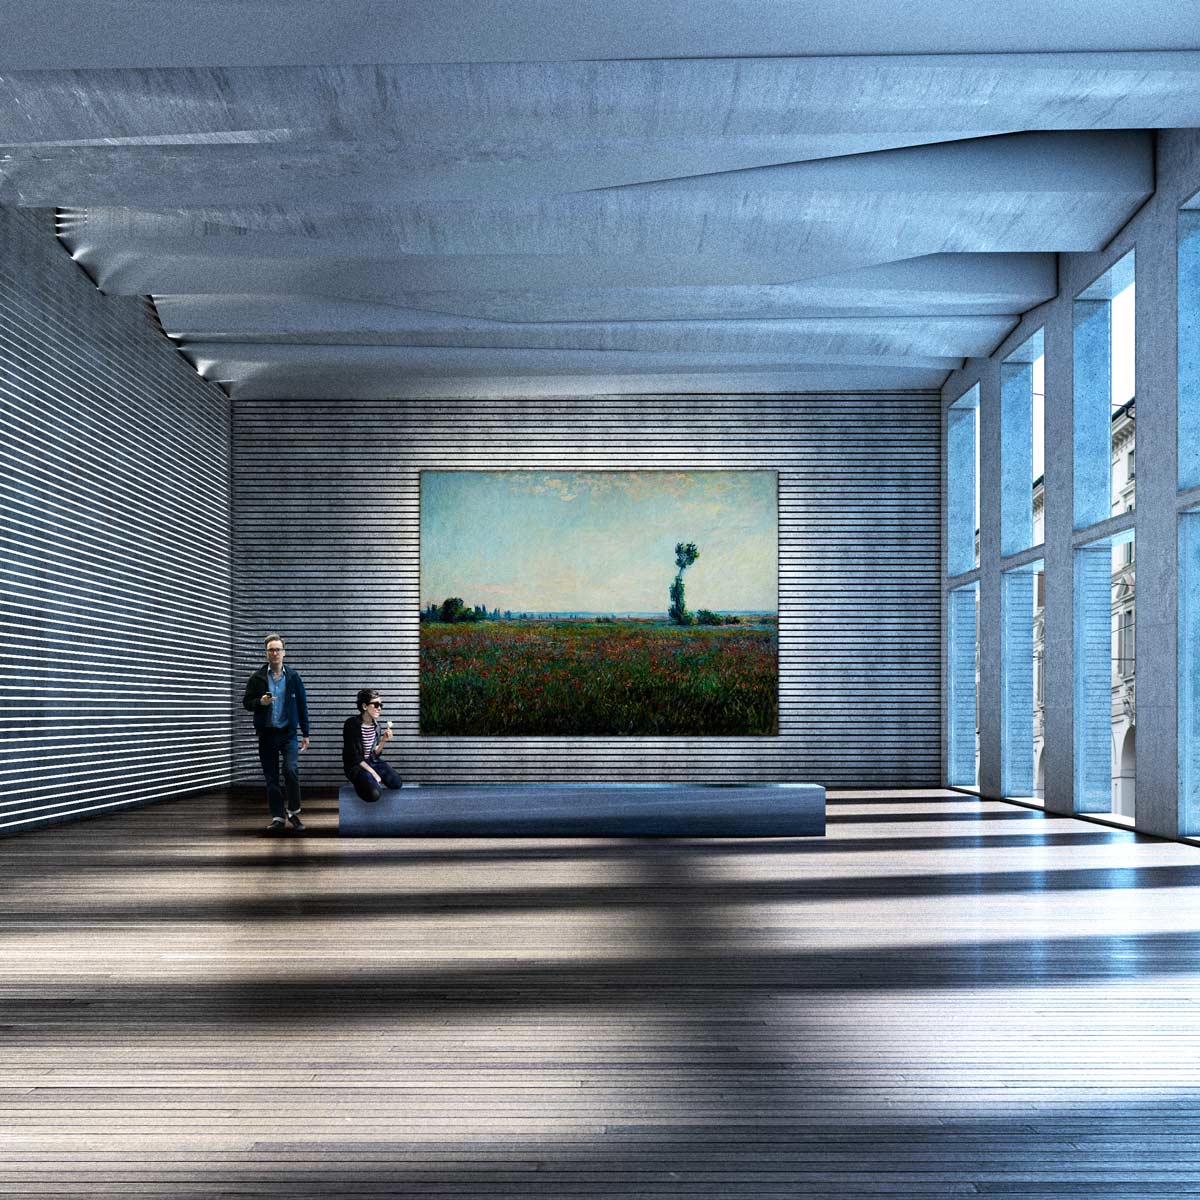 Rendering for interior architectural project - Museum